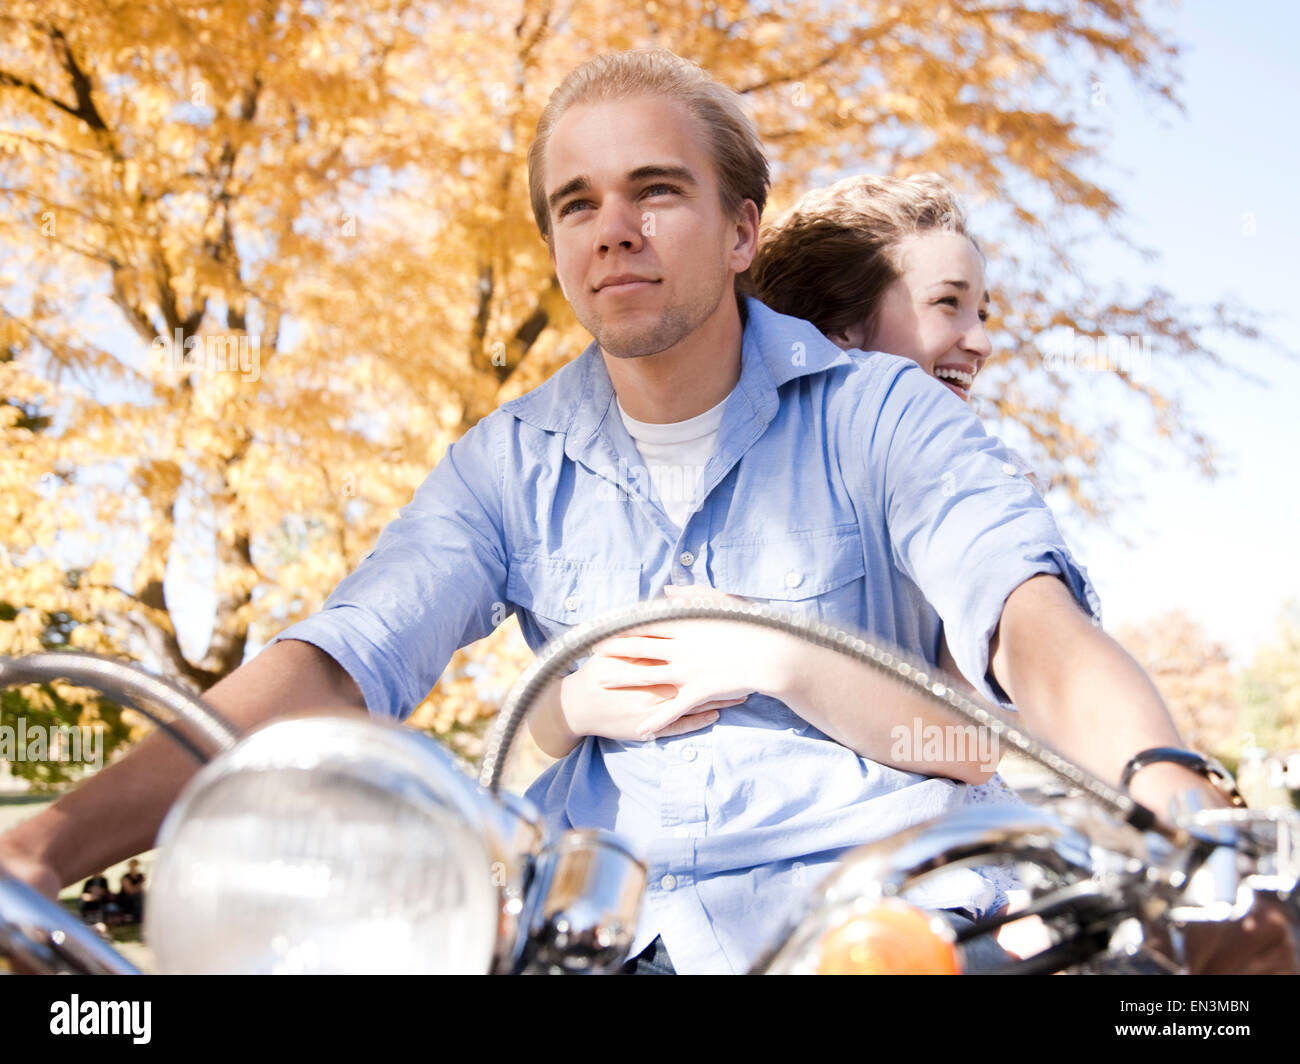 Young couple riding on motorcycle in Autumn forest Stock Photo